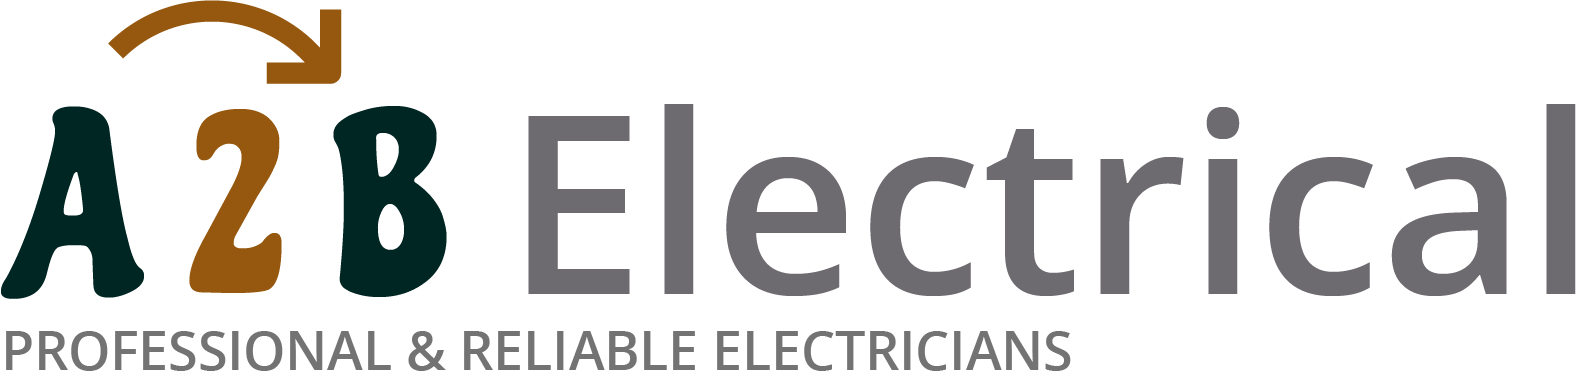 If you have electrical wiring problems in Ely, we can provide an electrician to have a look for you. 